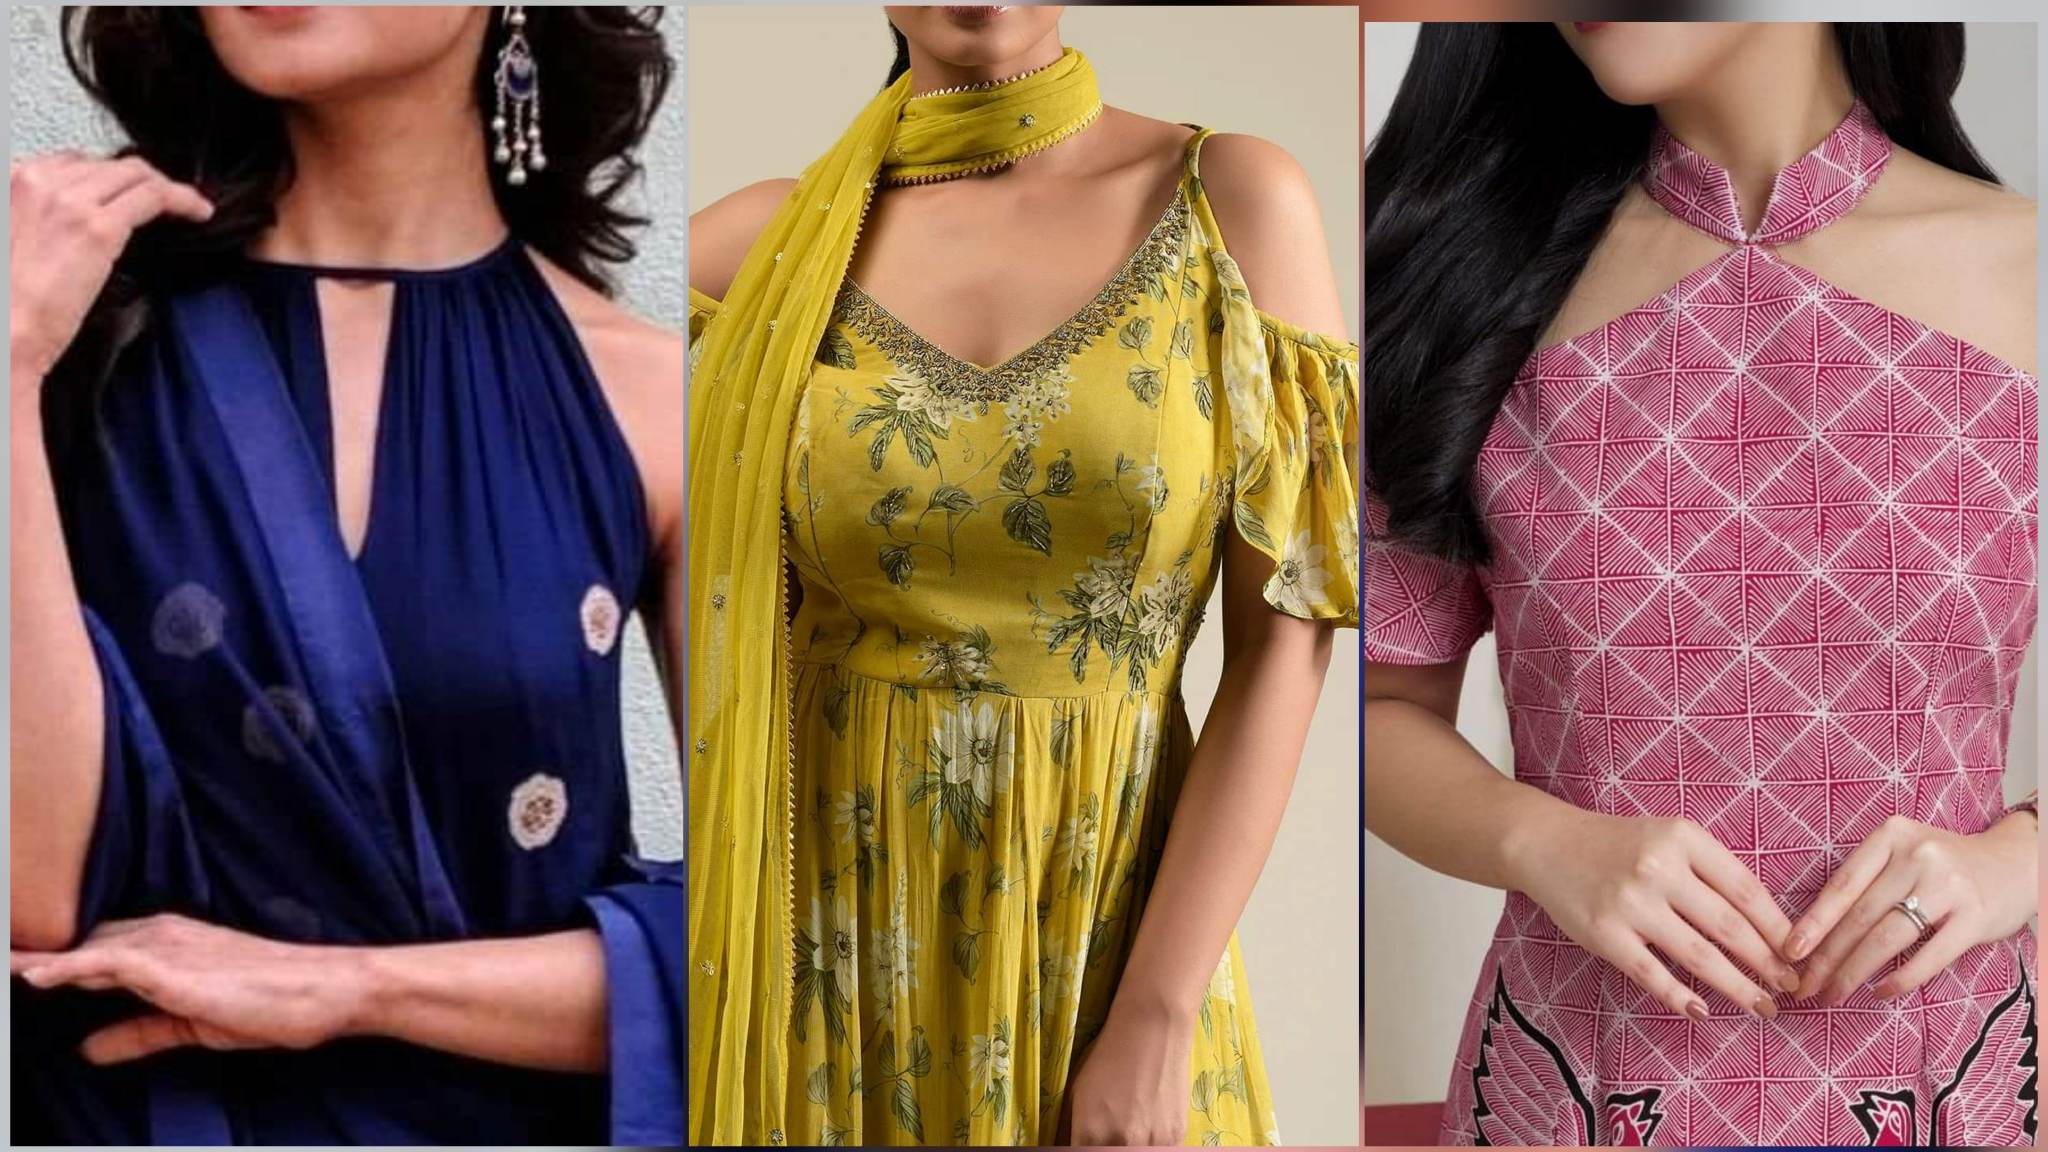 Latest 50 Types Of Kurti Neck Designs For Women (2022) - Tips and Beauty